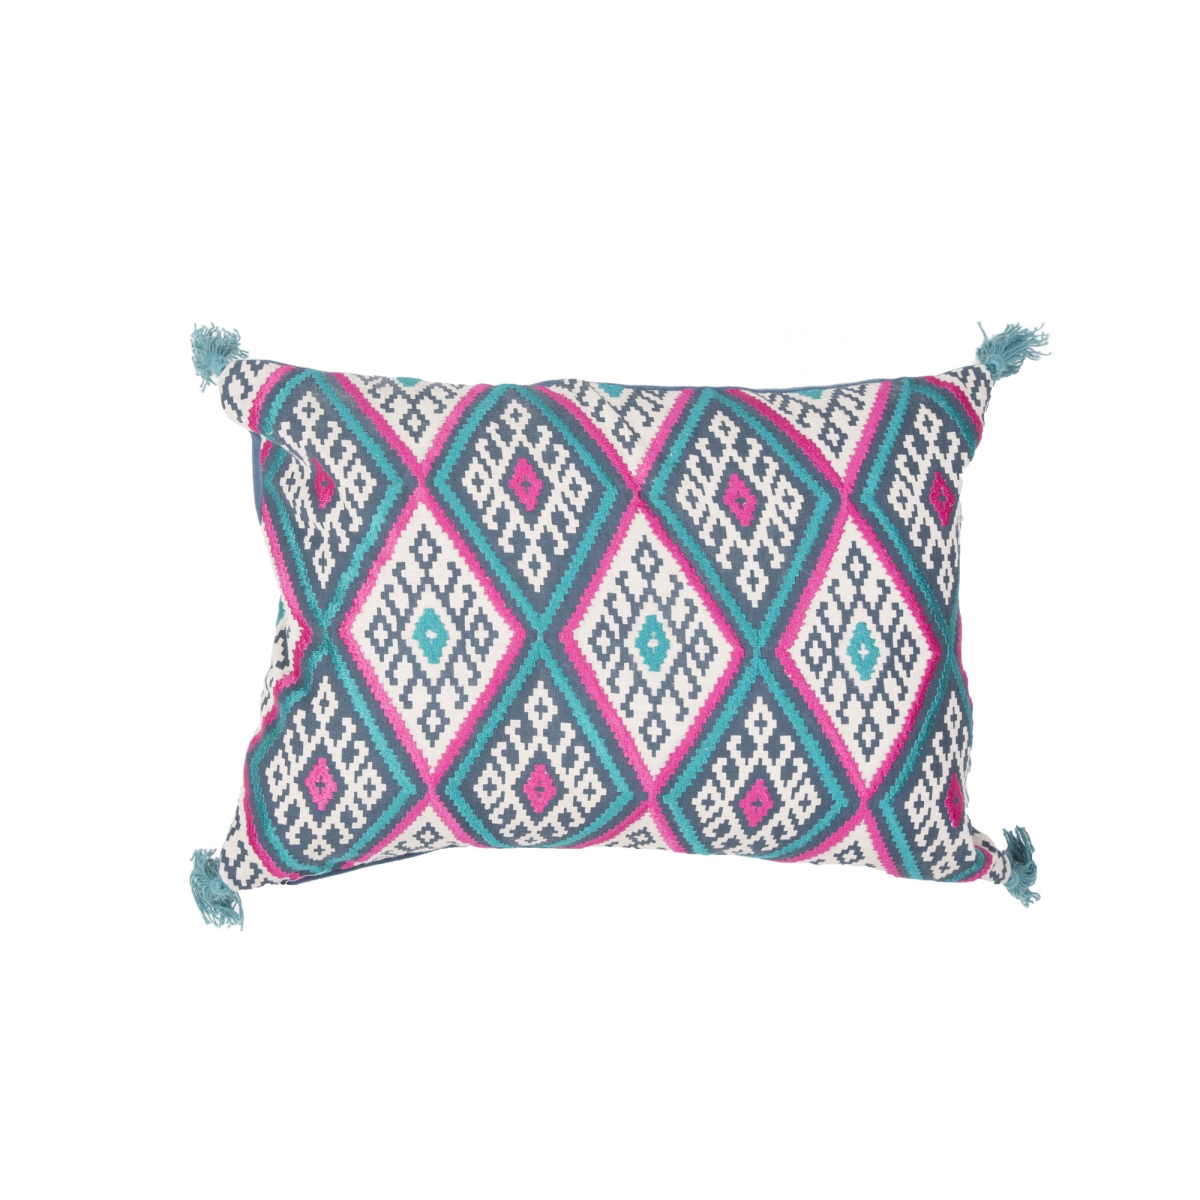 Plw102293 14 X 20 In. Traditions Made Modern Pillows Museum Ifa Yuma Turquoise & Pink Geometric Down Throw Pillow